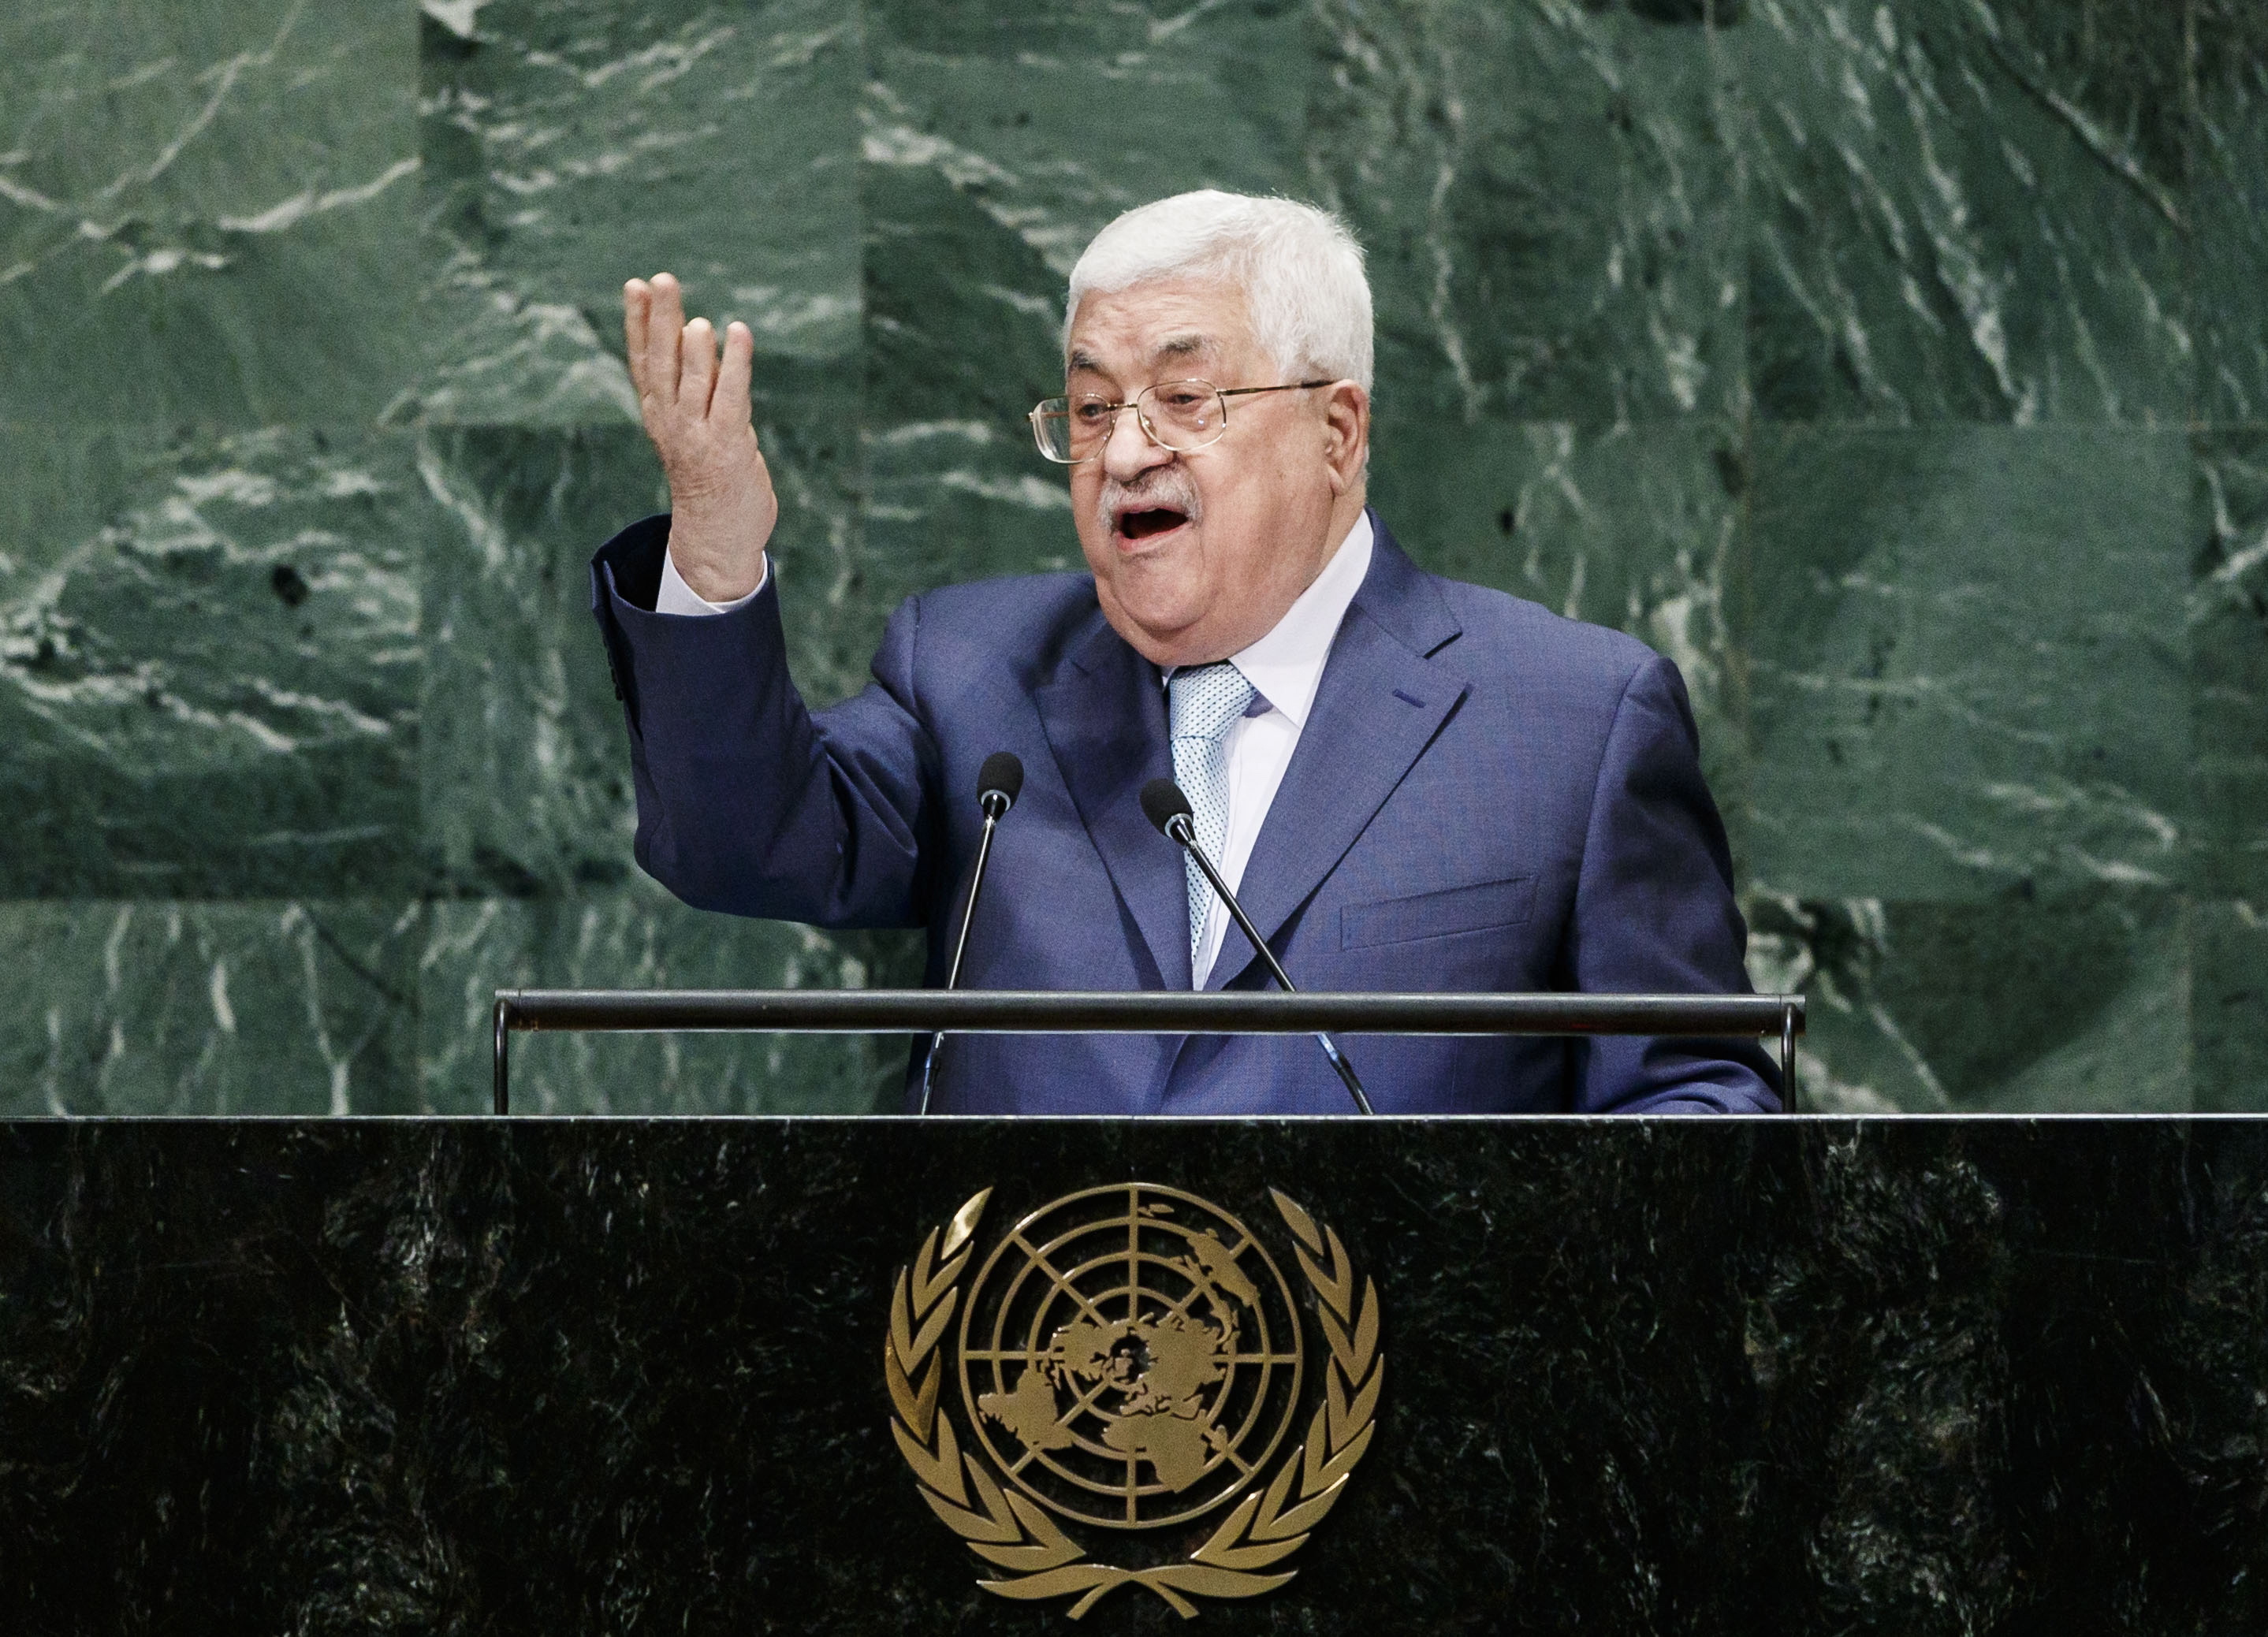 epa07051636 Palestine's President Mahmoud Abbas addresses the General Debate of the 73rd session of the General Assembly of the United Nations at United Nations Headquarters in New York, New York, USA, 27 September 2018. The General Debate of the 73rd session began on 25 September 2018 and runs until 01 October 2018.  EPA/JUSTIN LANE